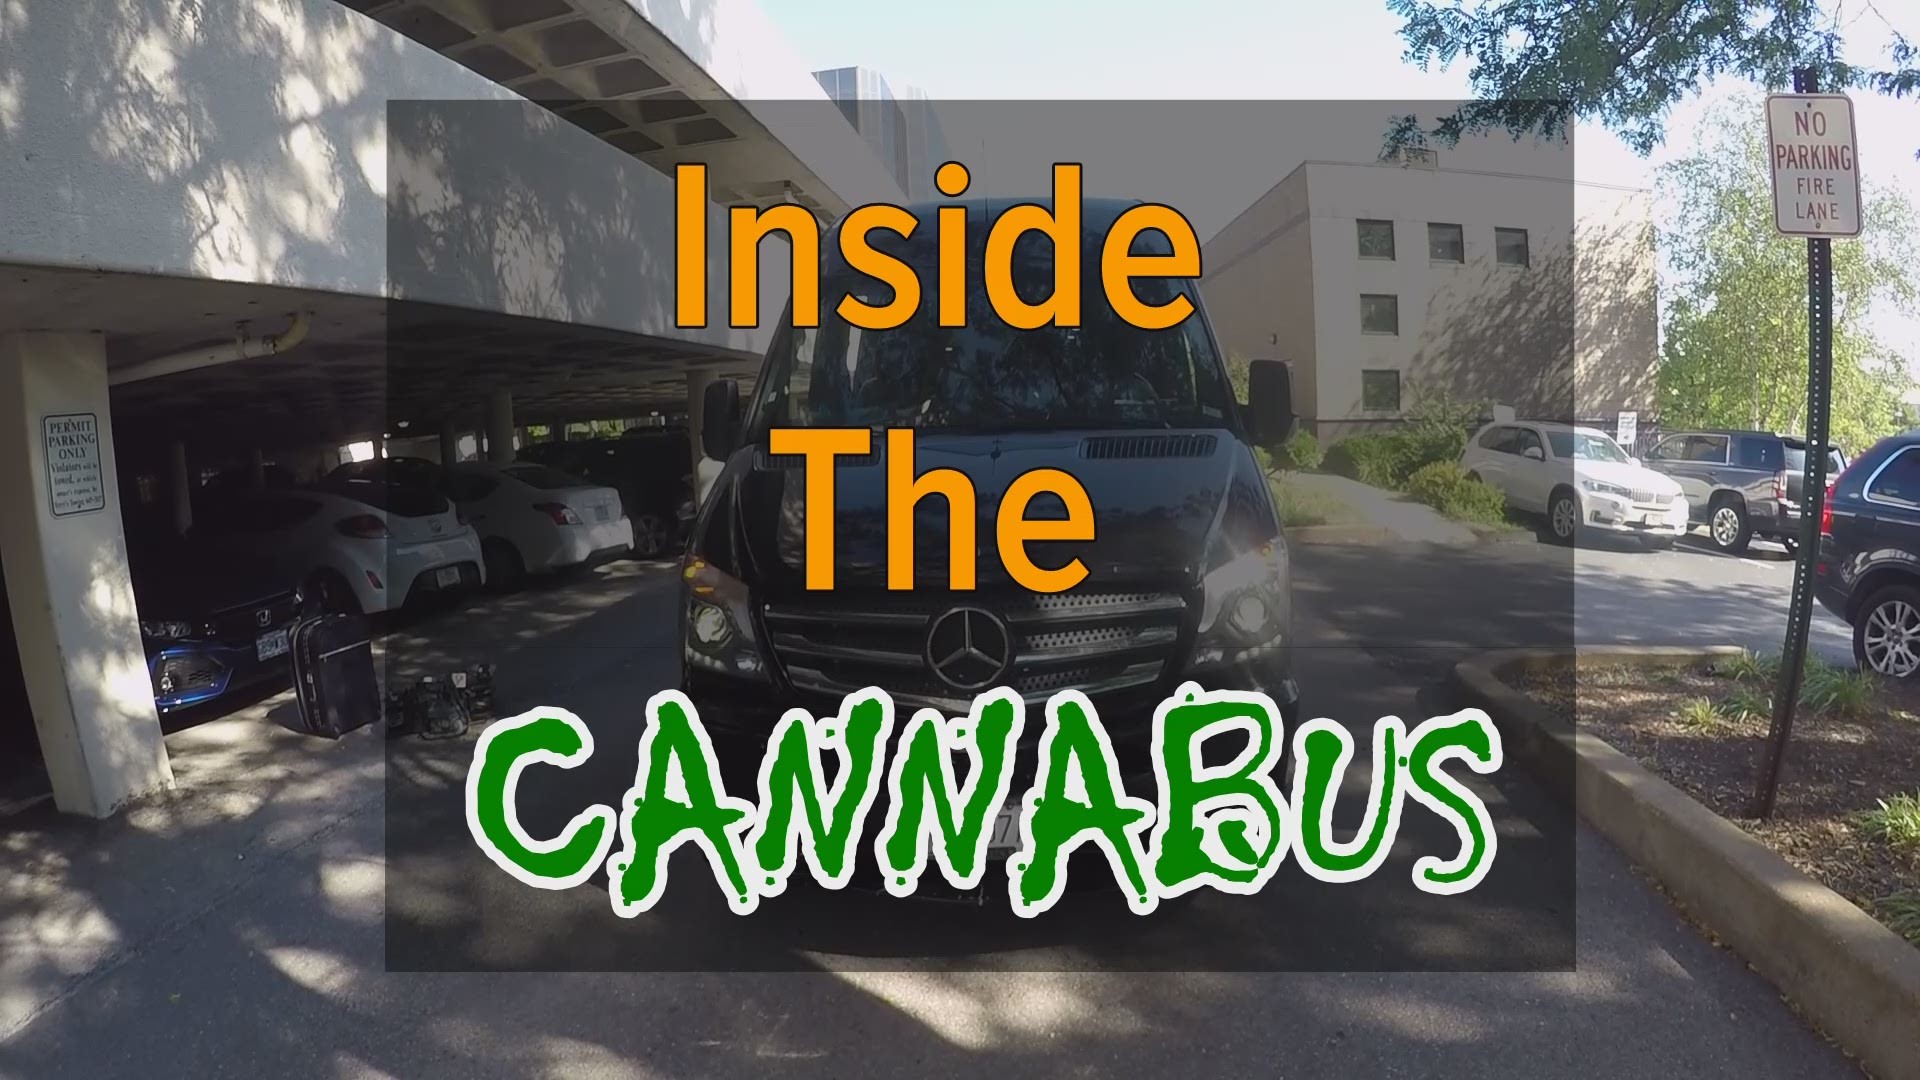 It’s a black Mercedes bus that carries Dr. Zinia Thomas around the state. She’s taking a unique approach to handling the new potential in medical cannabis.